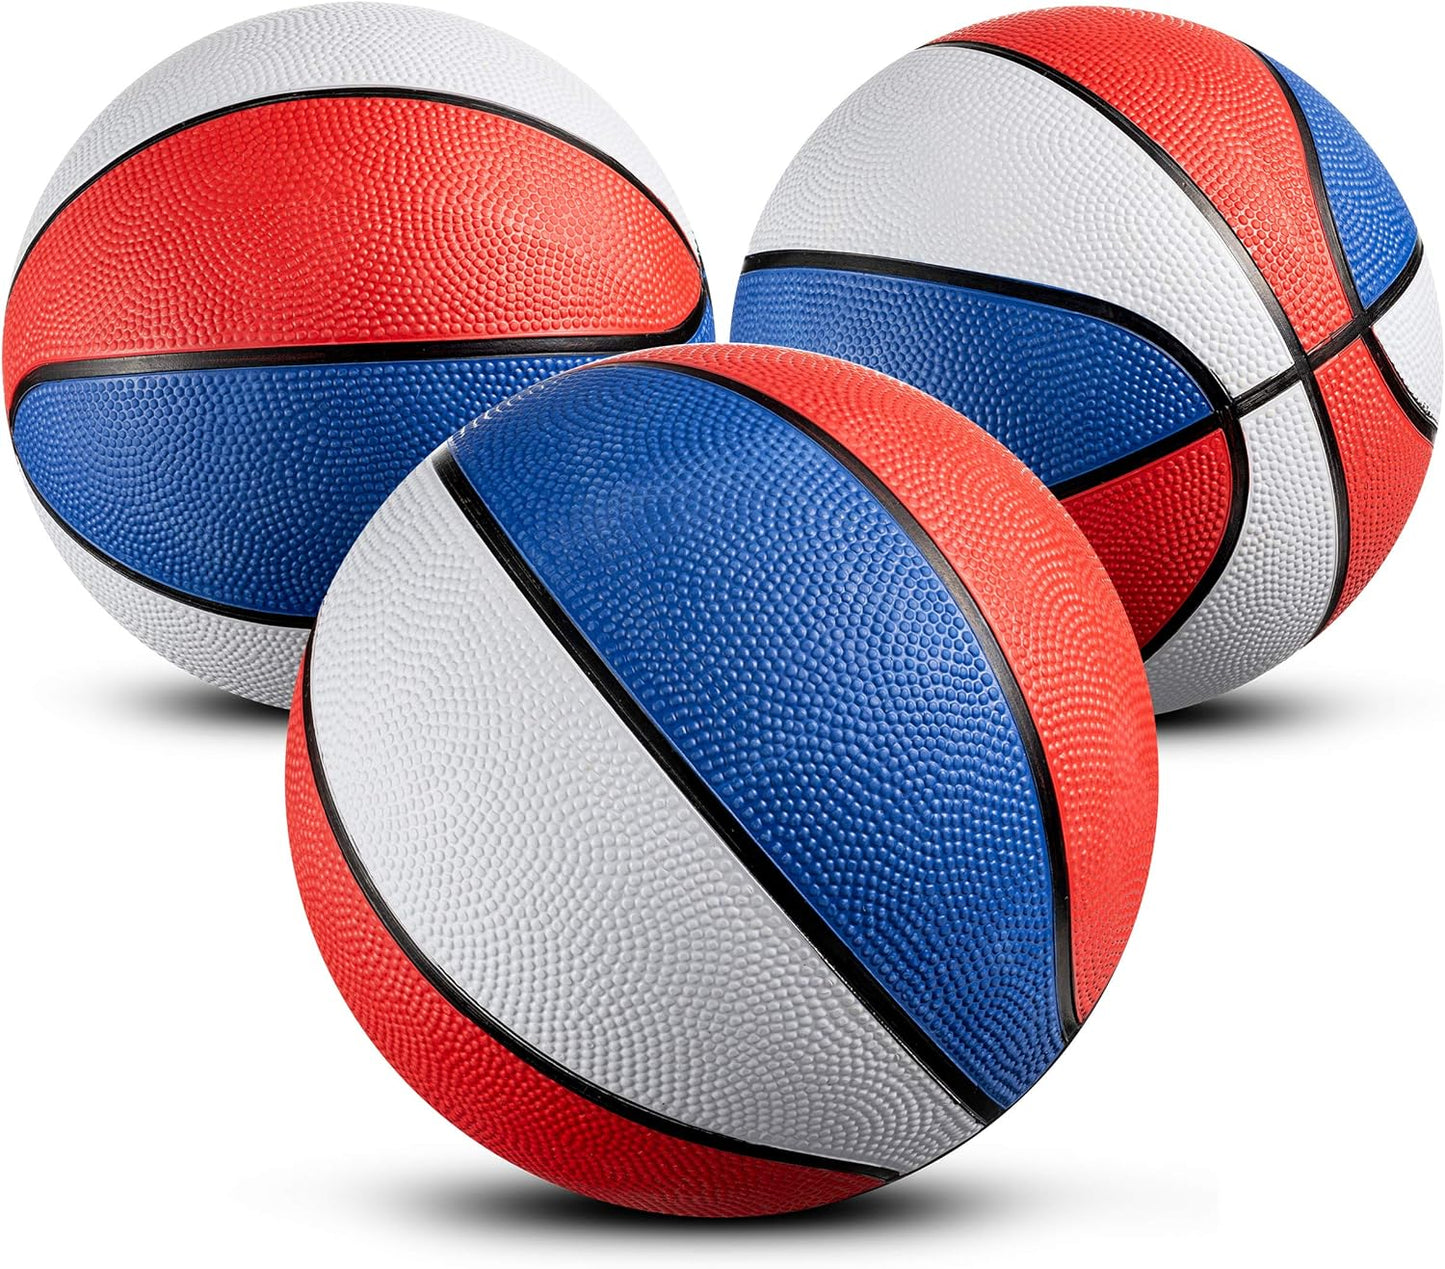 Mini Basketballs - (7 Inch, Size 3) Pack of 3 - Mini Hoop Basketball Set for Indoor, Outdoor, Pool Parties, Small Hoops Basketball Game Party Favors for Kids Patriotic Red, White and Blue Colors